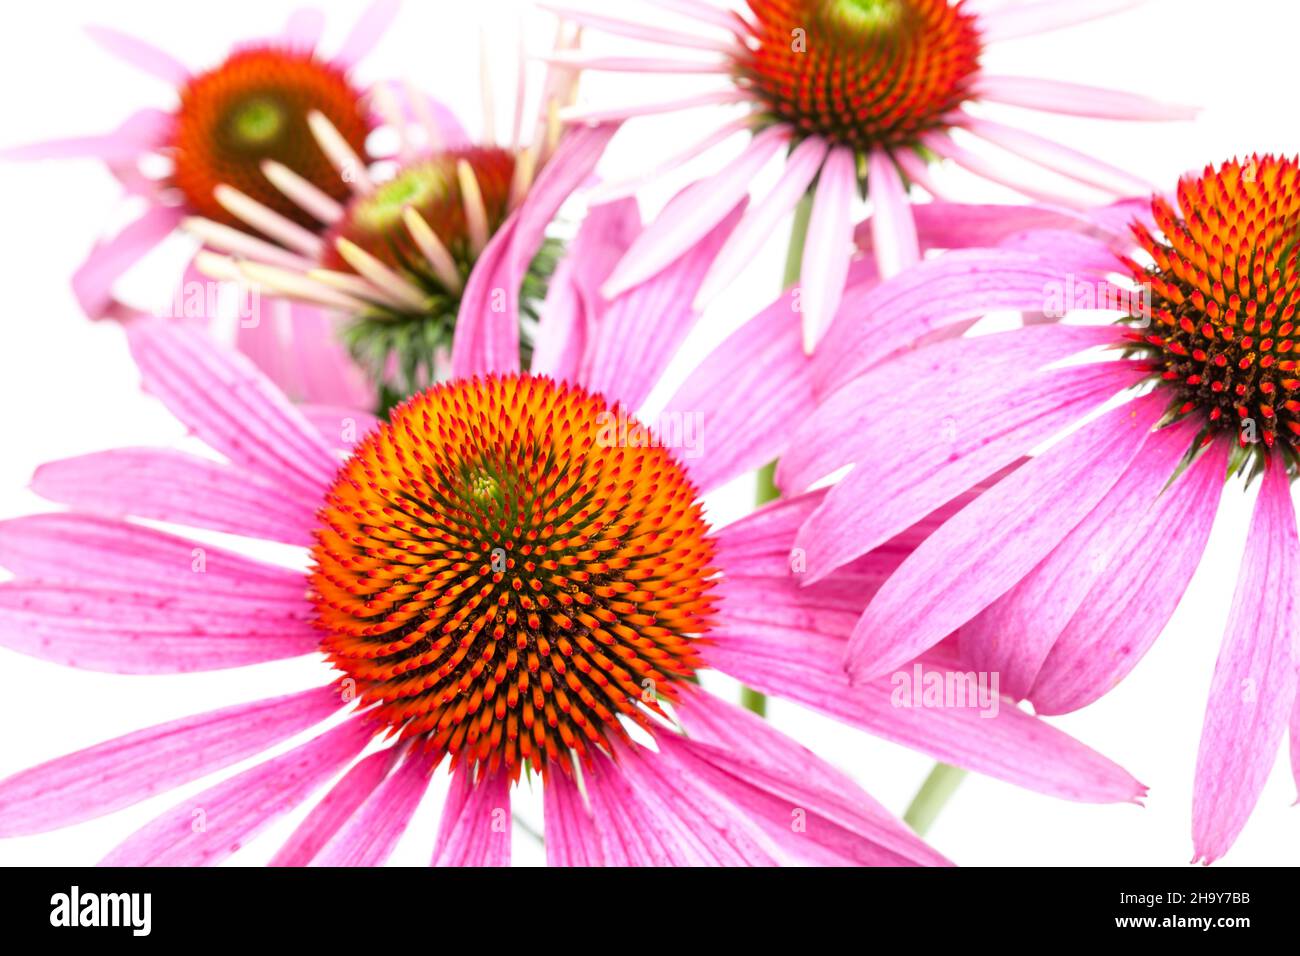 Echinacea, coneflower, several immune system, flowers, different, fresh, many, space, up, drug, flower, cut, detail, close, close-up, background, medi Stock Photo